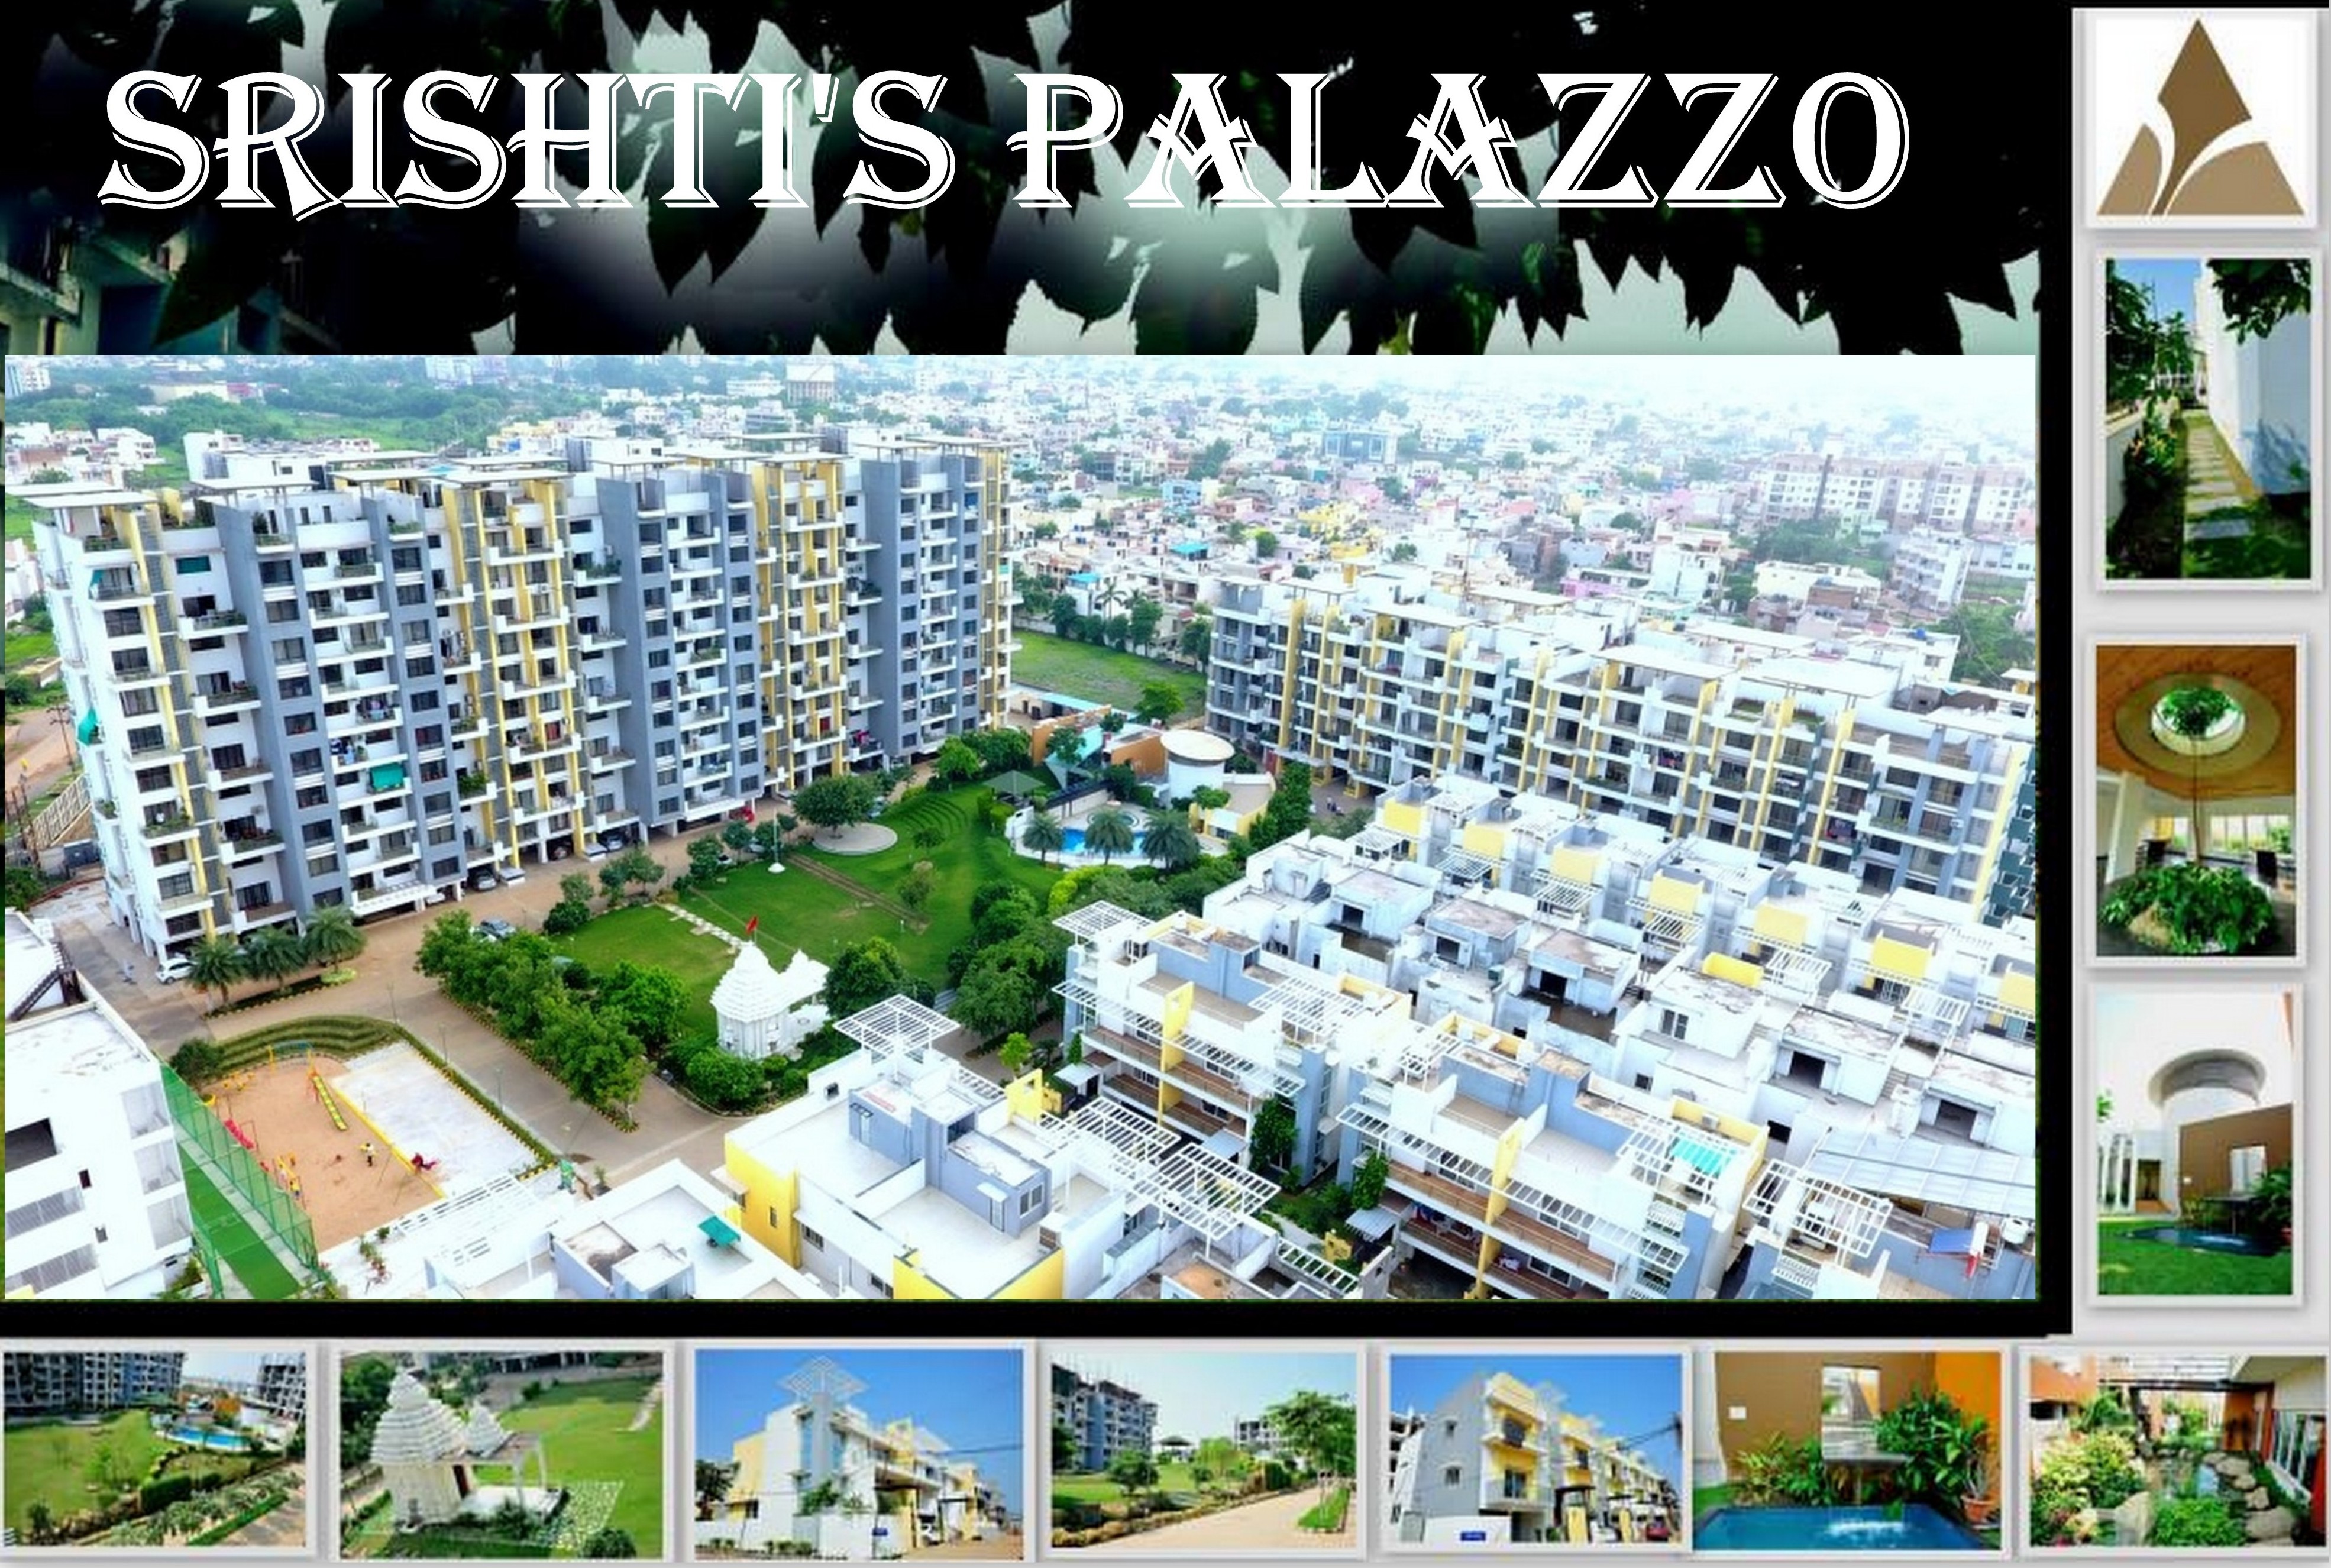 Best architectural design an example of creativity and innovation Surrounded by lush green garden at Srishtis palazzo